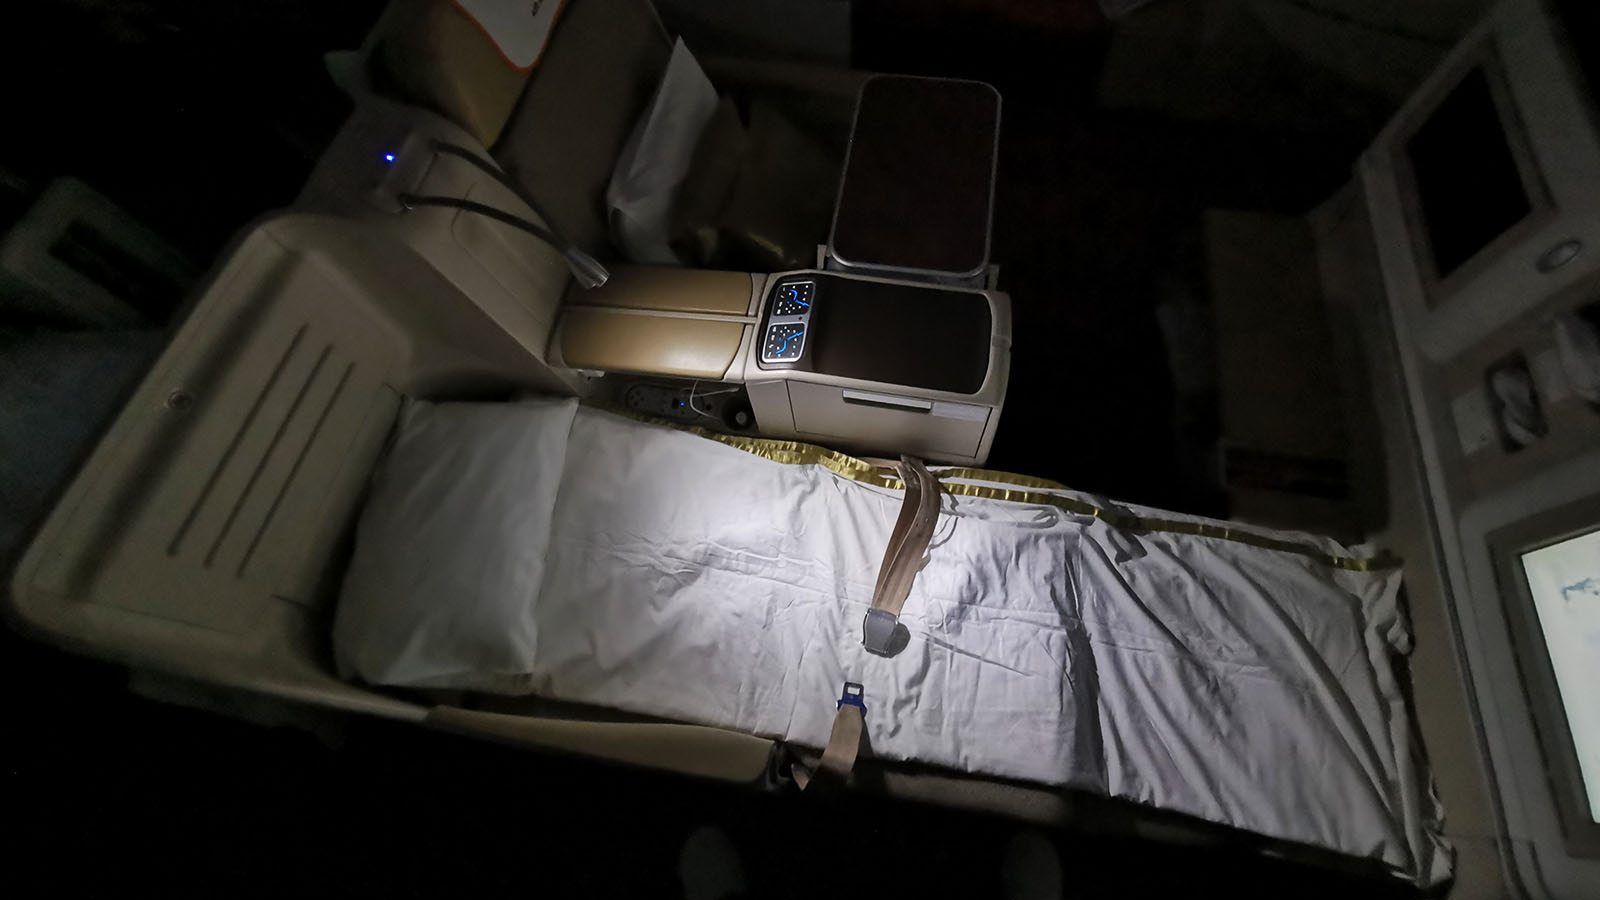 Flat bed in Air India's Boeing 787 Business Class